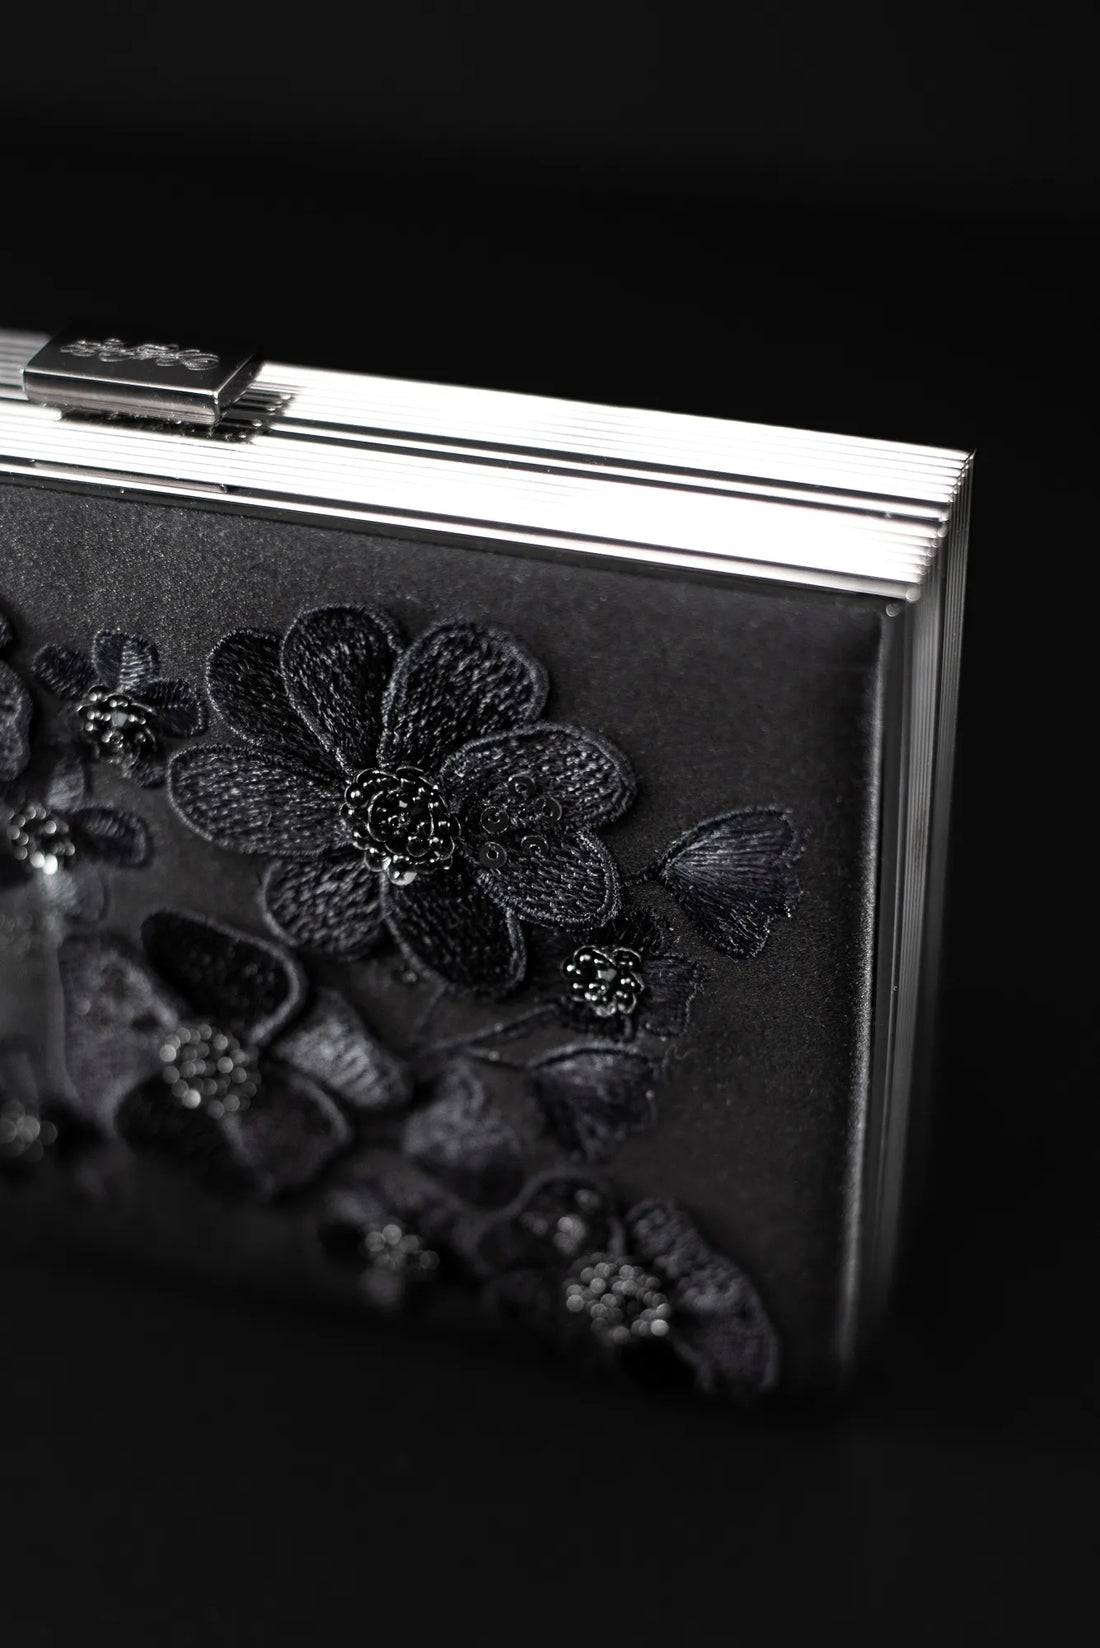 An exclusive capsule collection Venezia Clutch x MICAELA - Black Satin Floral Embroidery with 3D floral embroidery from The Bella Rosa Collection.